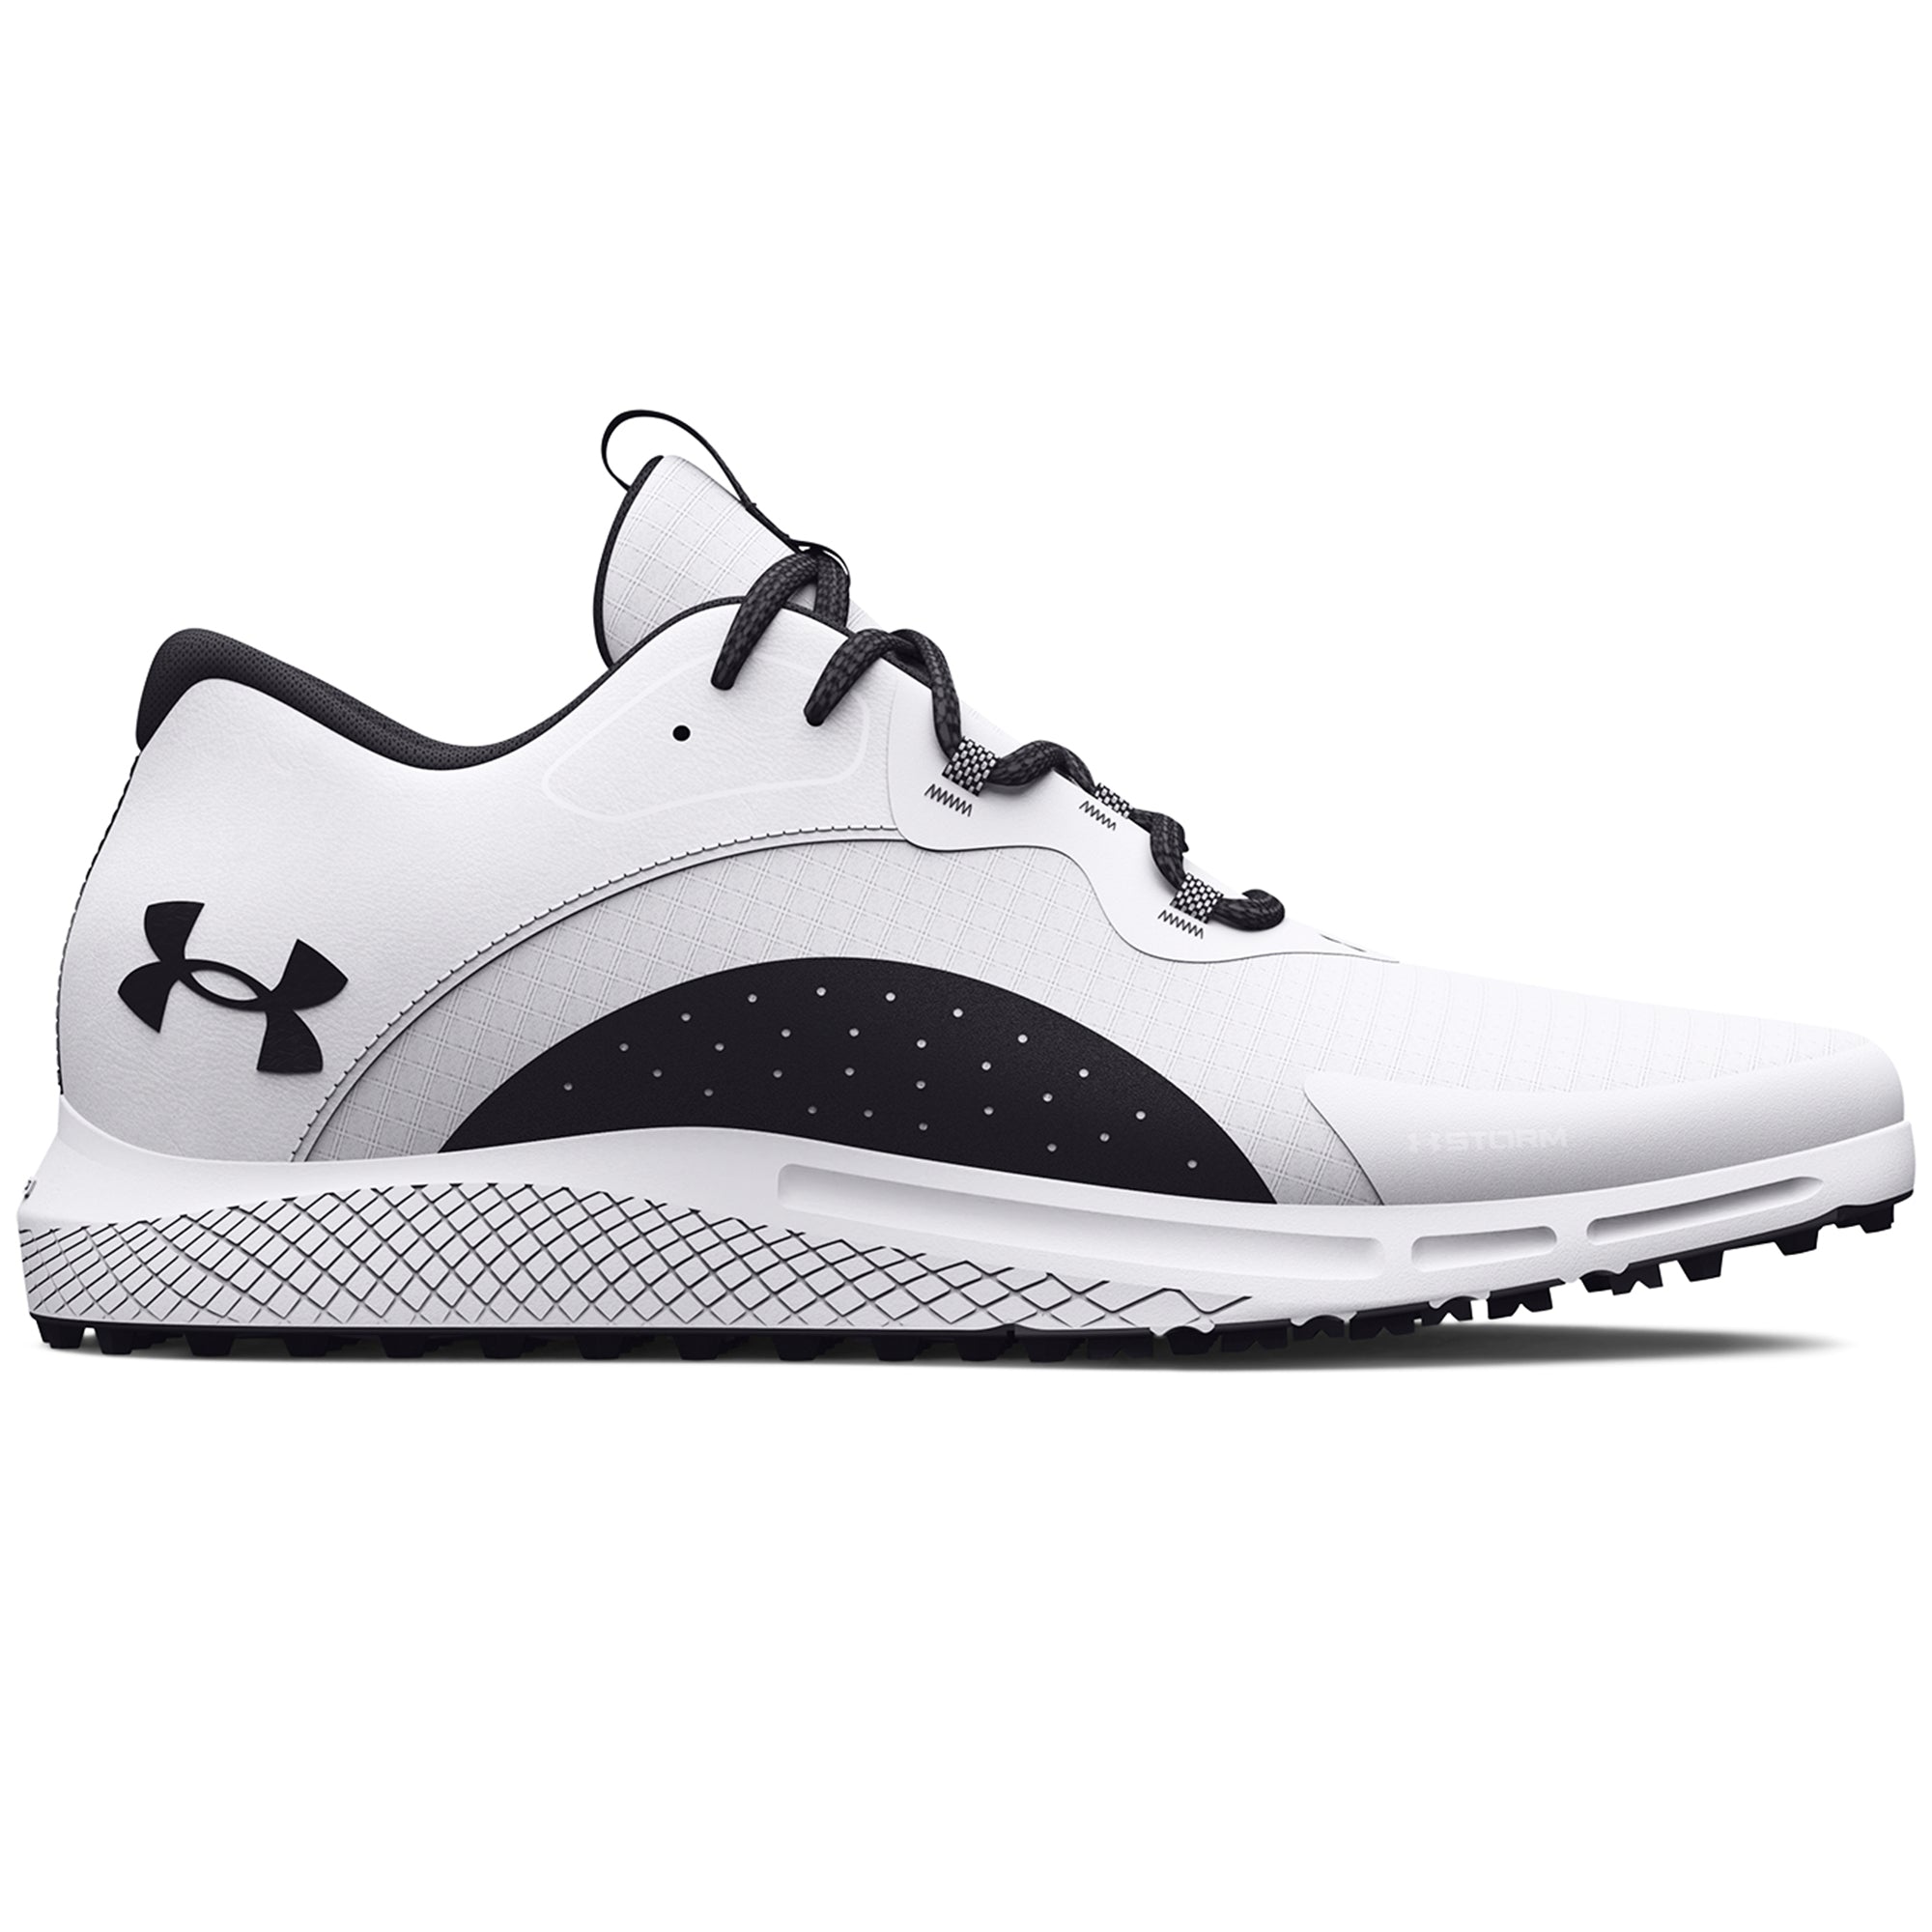 under-armour-charged-draw-2-sl-golf-shoes-3026399-white-100